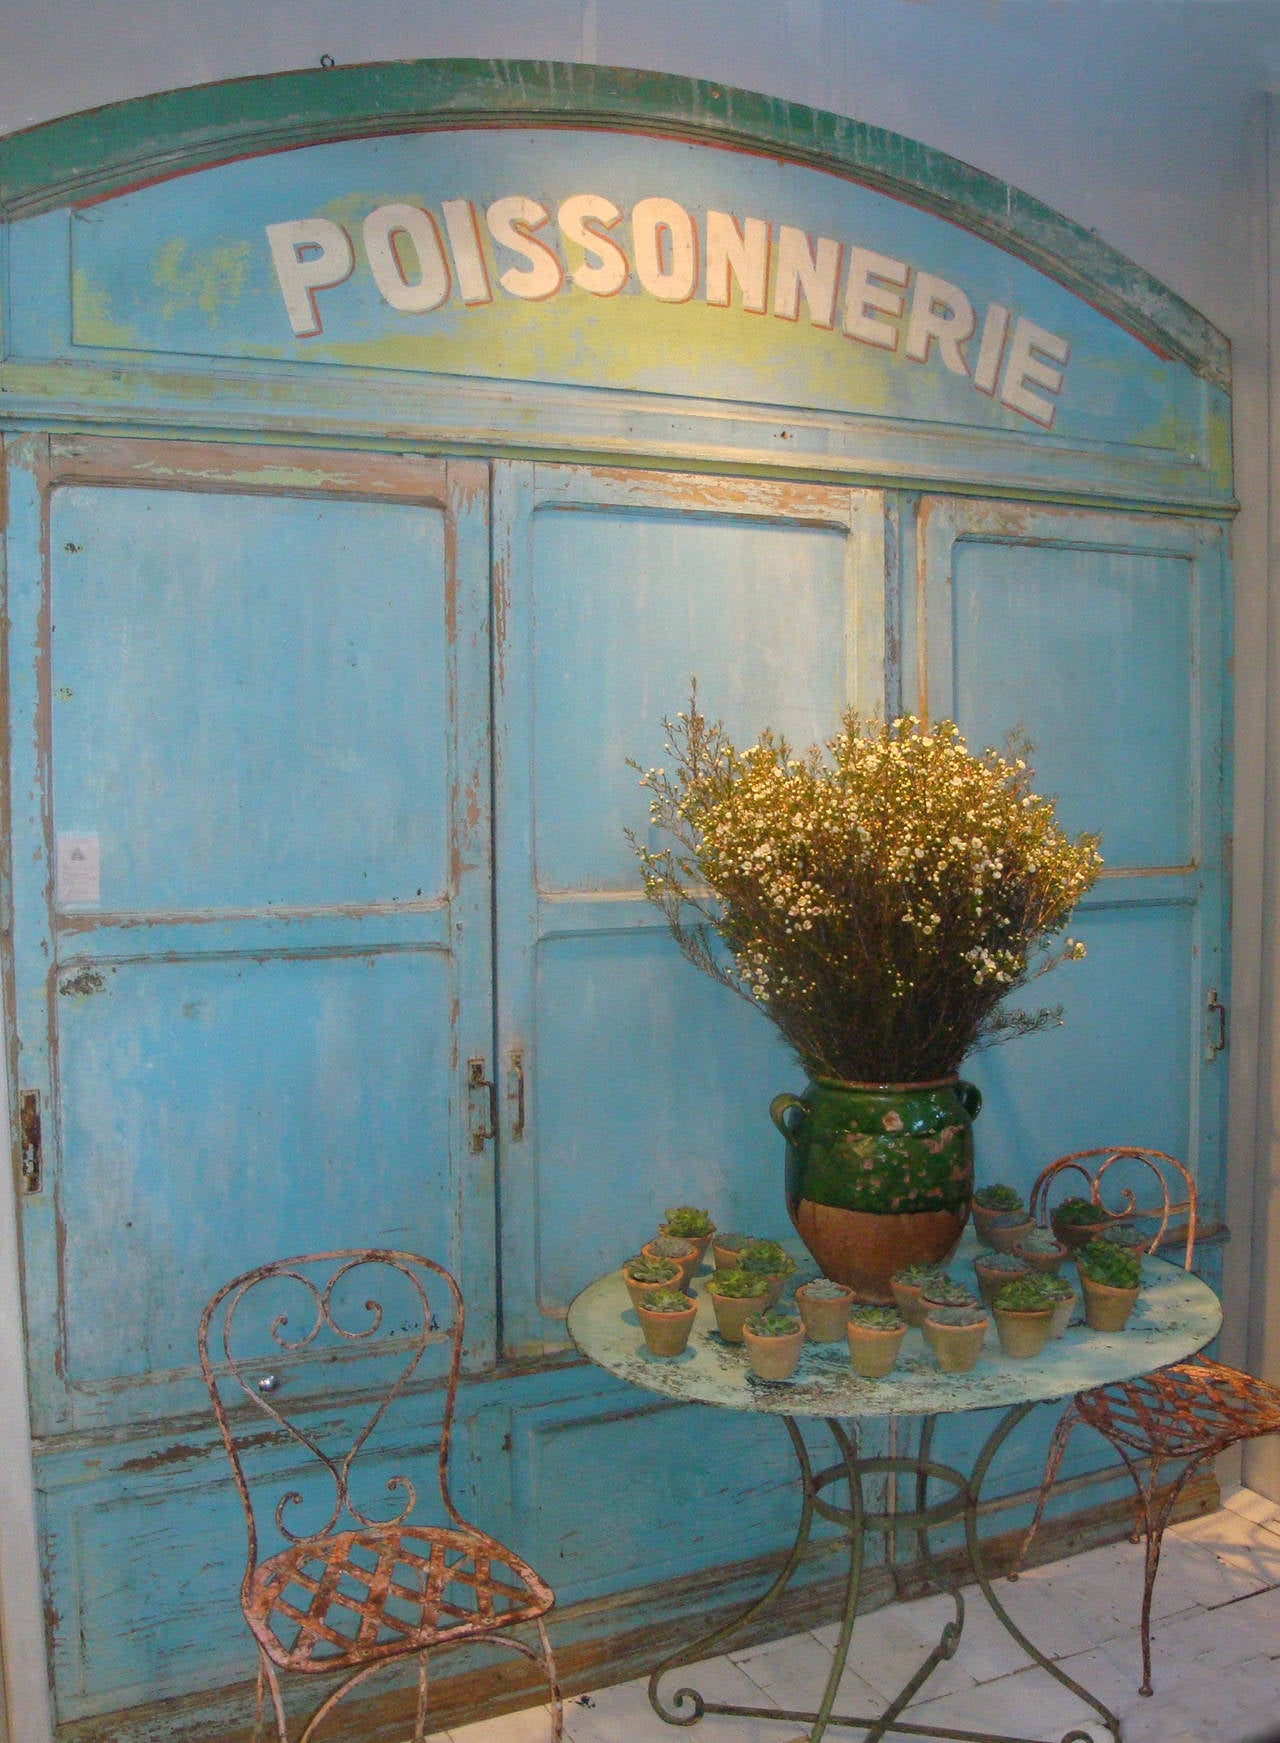 A very unusual French 19th century fish shop front with removable shutters, consisting of shop windows and front door - painted in delightful original colours. Could make a striking piece of decoration for a kitchen, cafe or.....?